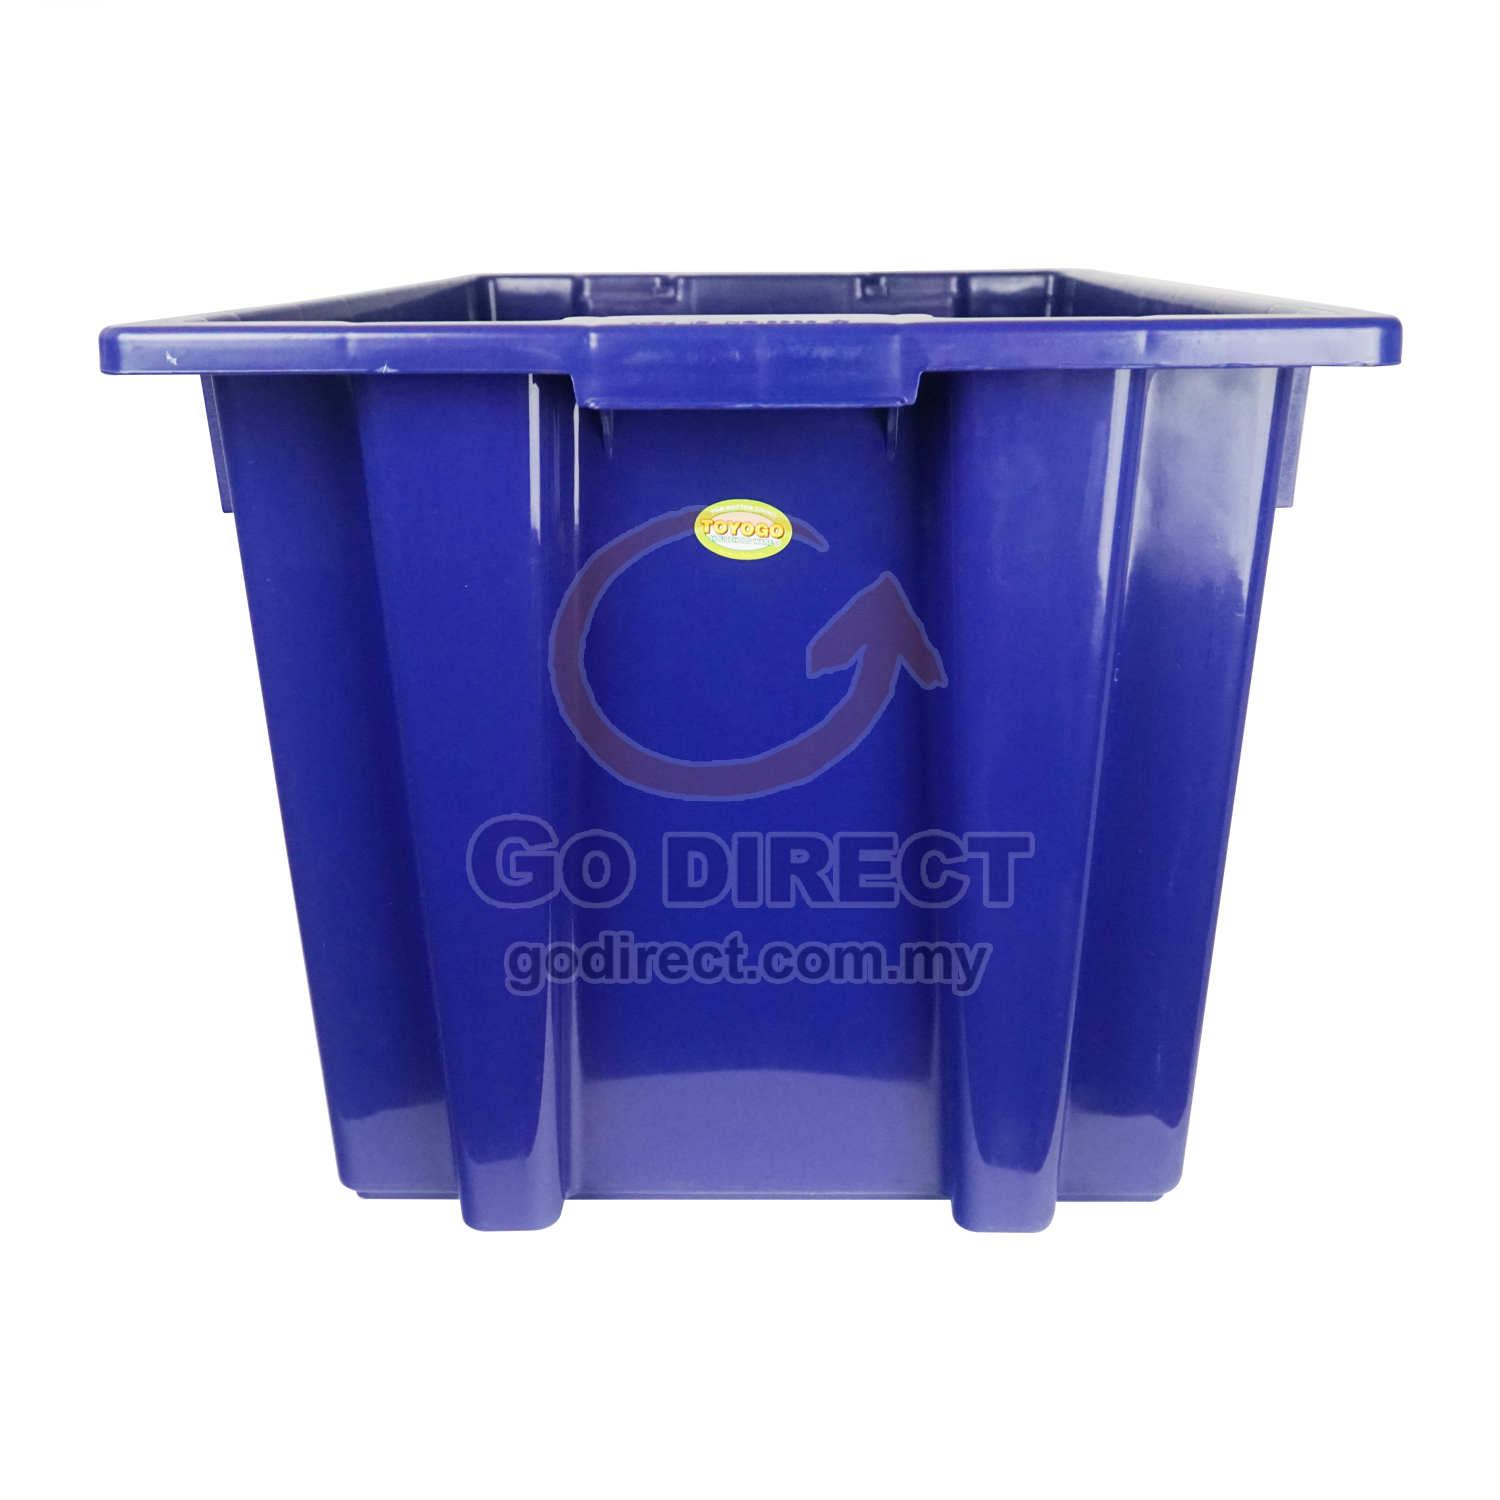 NCI68012 Multipurpose Container / Storage Box With Cover - 5.5 Litre  Household Housekeeping Garbage Bags Malaysia, Selangor, Kuala Lumpur (KL),  Bukit Sentosa Supplier, Suppliers, Supply, Supplies